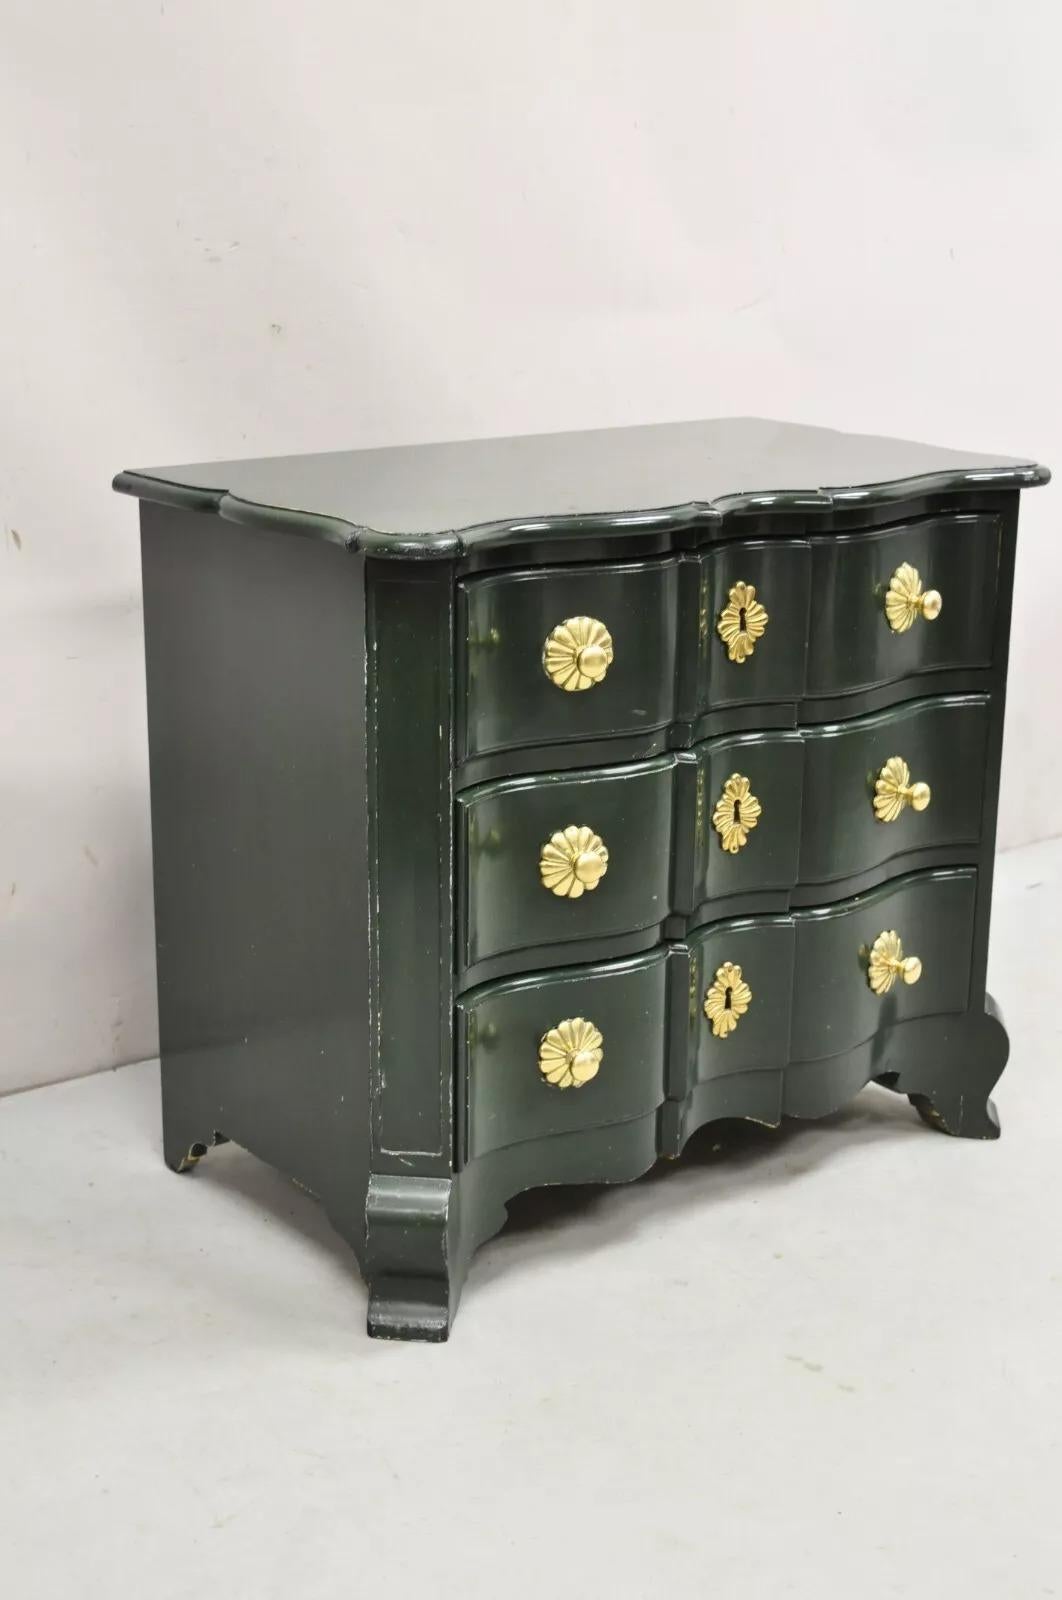 Vintage French Provincial Style Green Lacquer 3 Drawer Nightstand by Roundtree Country Reproductions. Item features 3 dovetailed drawers, solid brass hardware, original label, solid wood construction, quality American craftsmanship. Circa Mid 20th